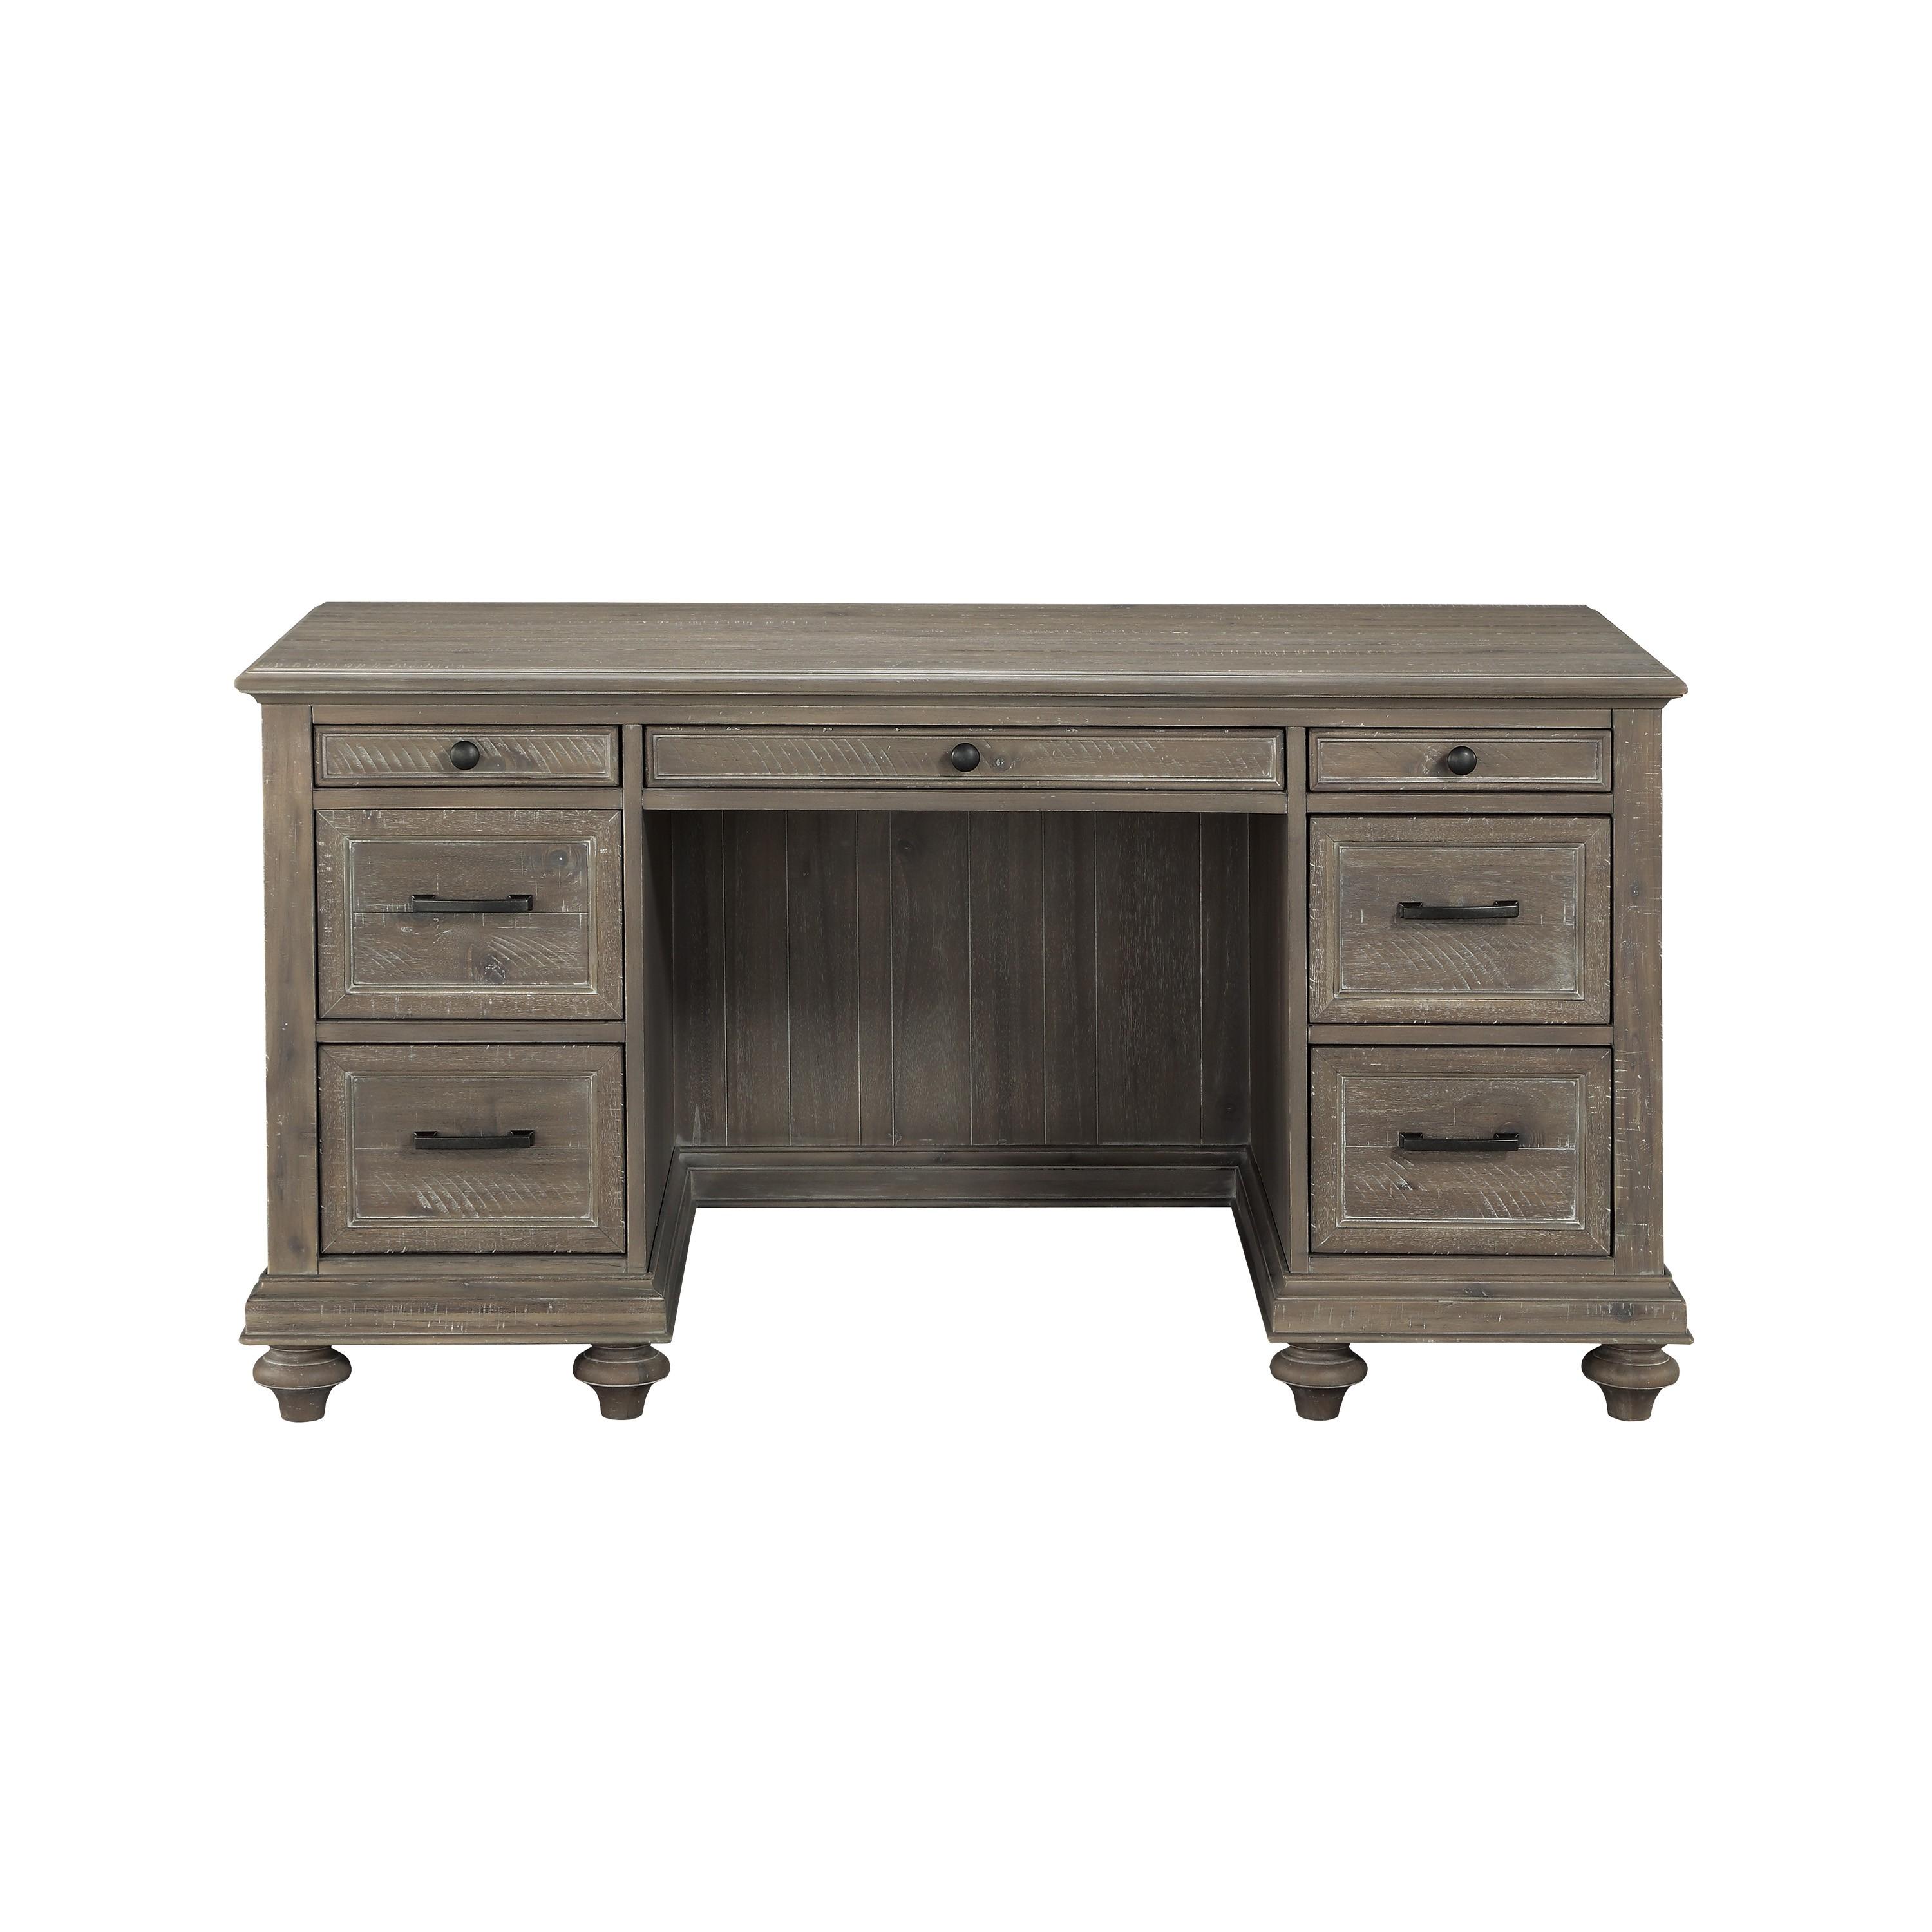 Transitional Executive Desk 1689BR-17 Cardano 1689BR-17 in Light Brown 